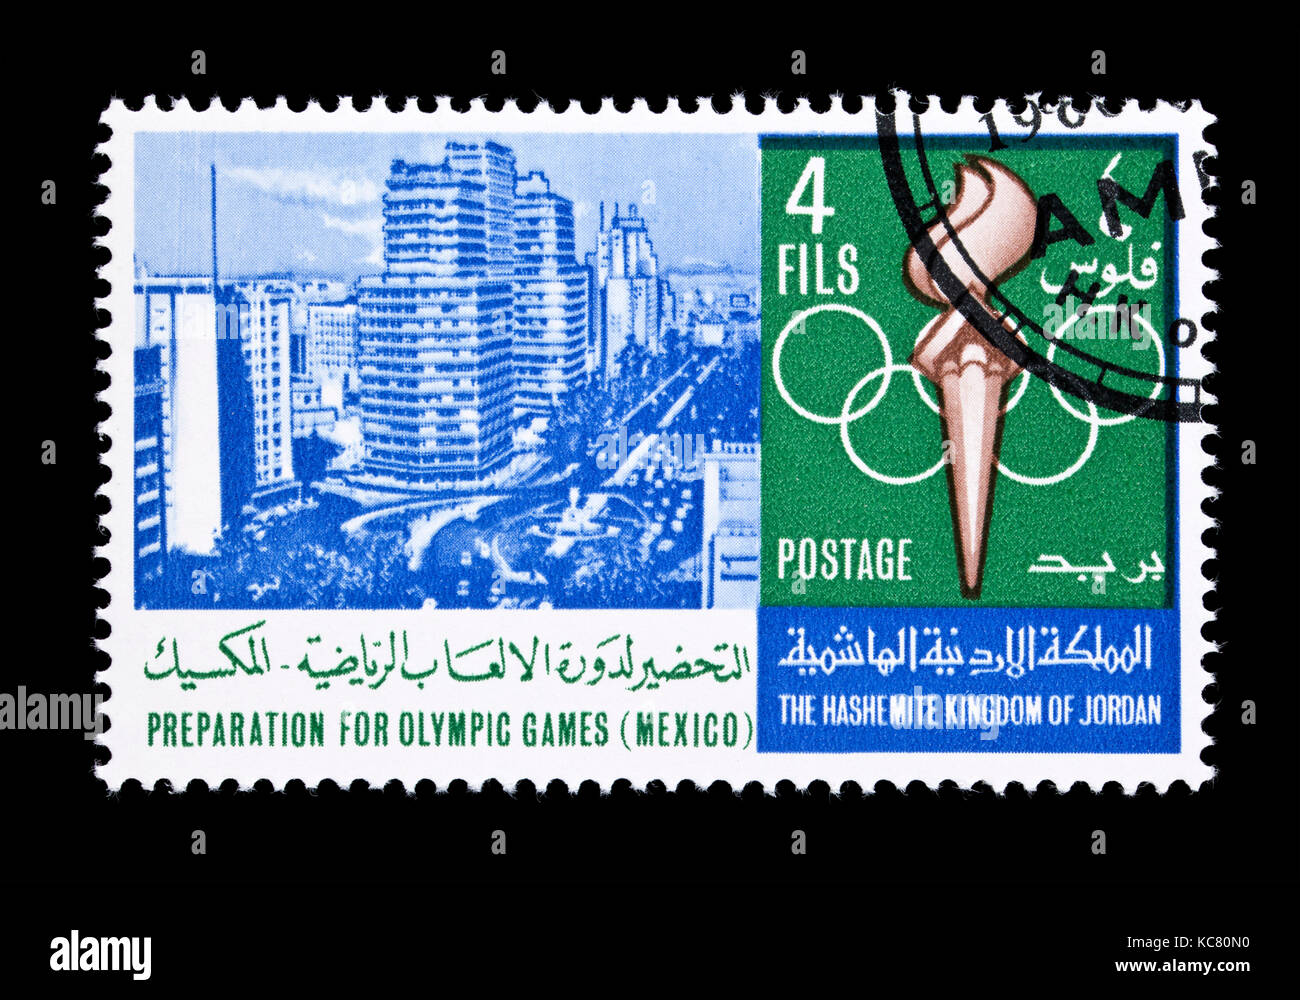 Postage stamp from Jordan depicting the Olympic Torch and Paseo de la Reforma in Mexico City. Stock Photo